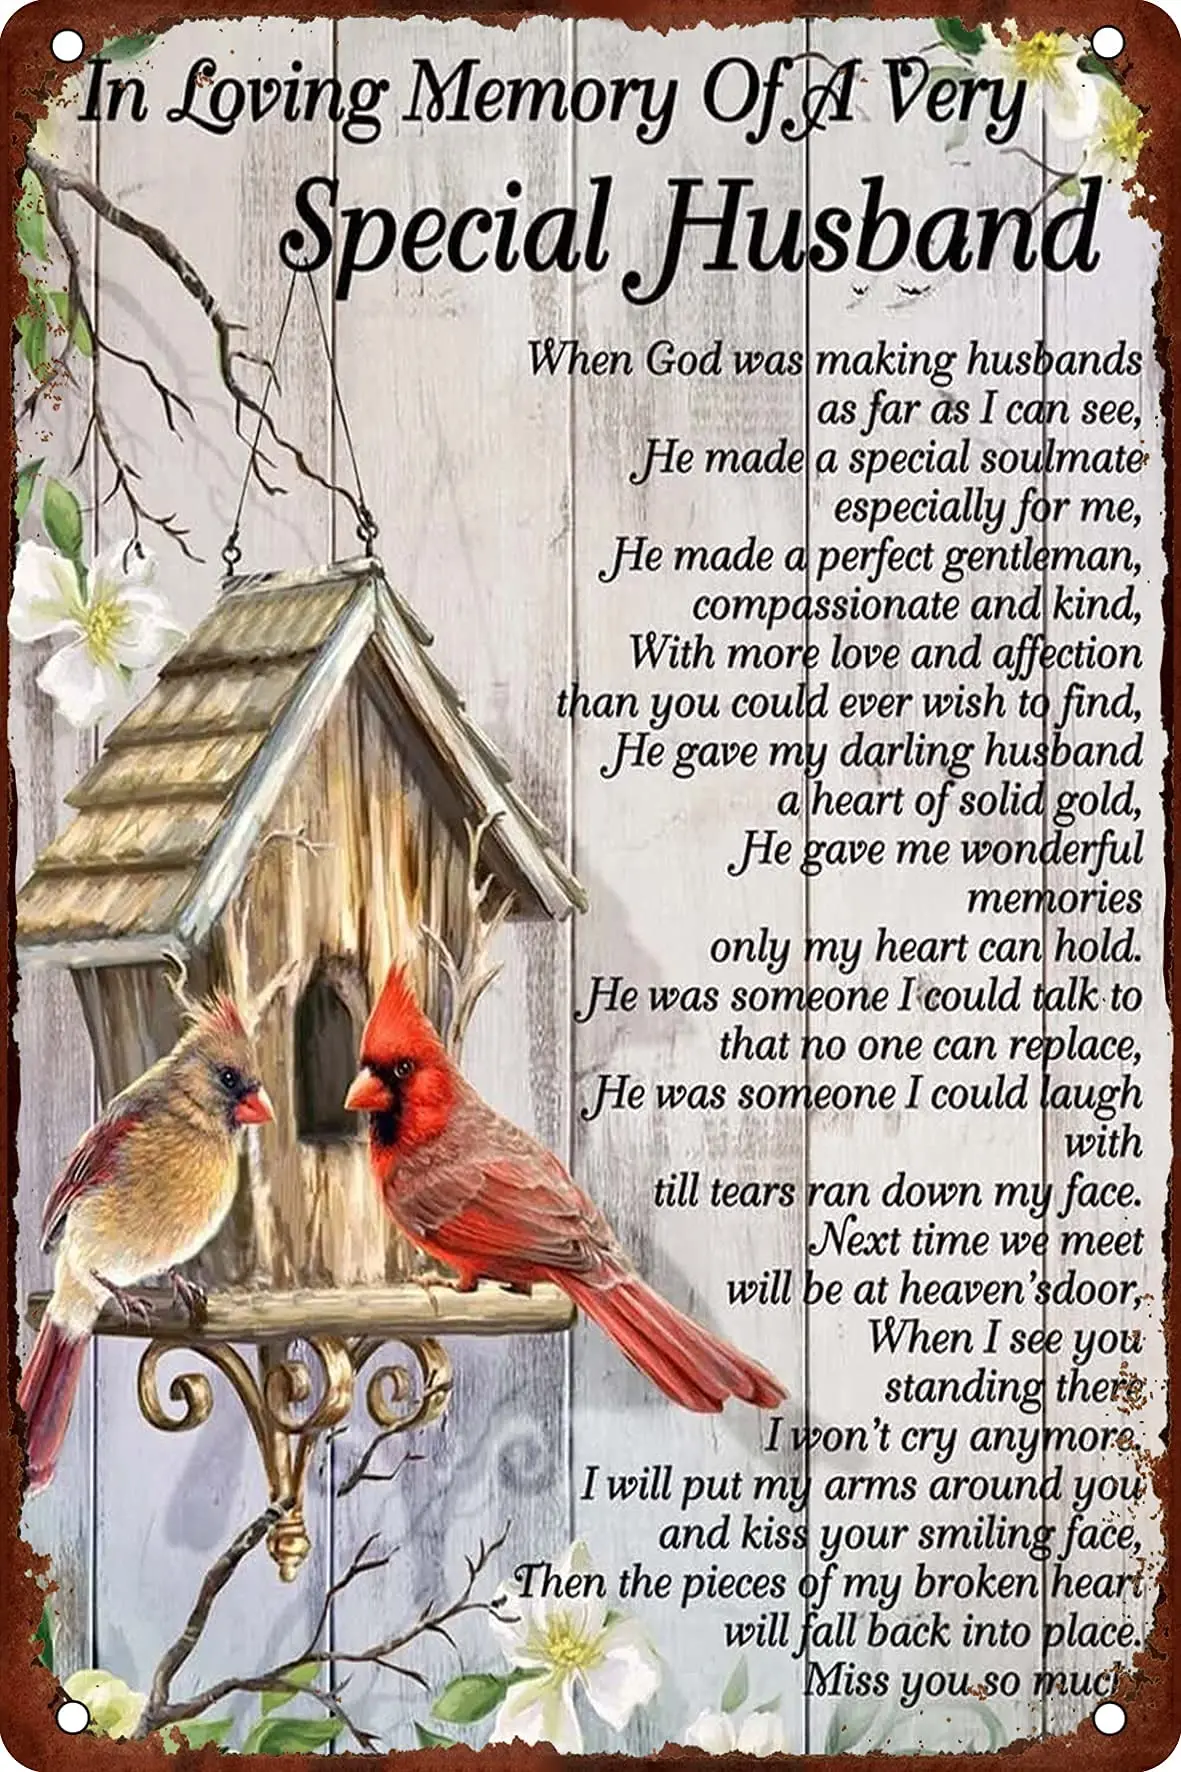 

In Loving Memory Of A Very Special Husband Cardinals Tin Signs Metal Decor Vintage Iron Painting Plate 8x12 Inch